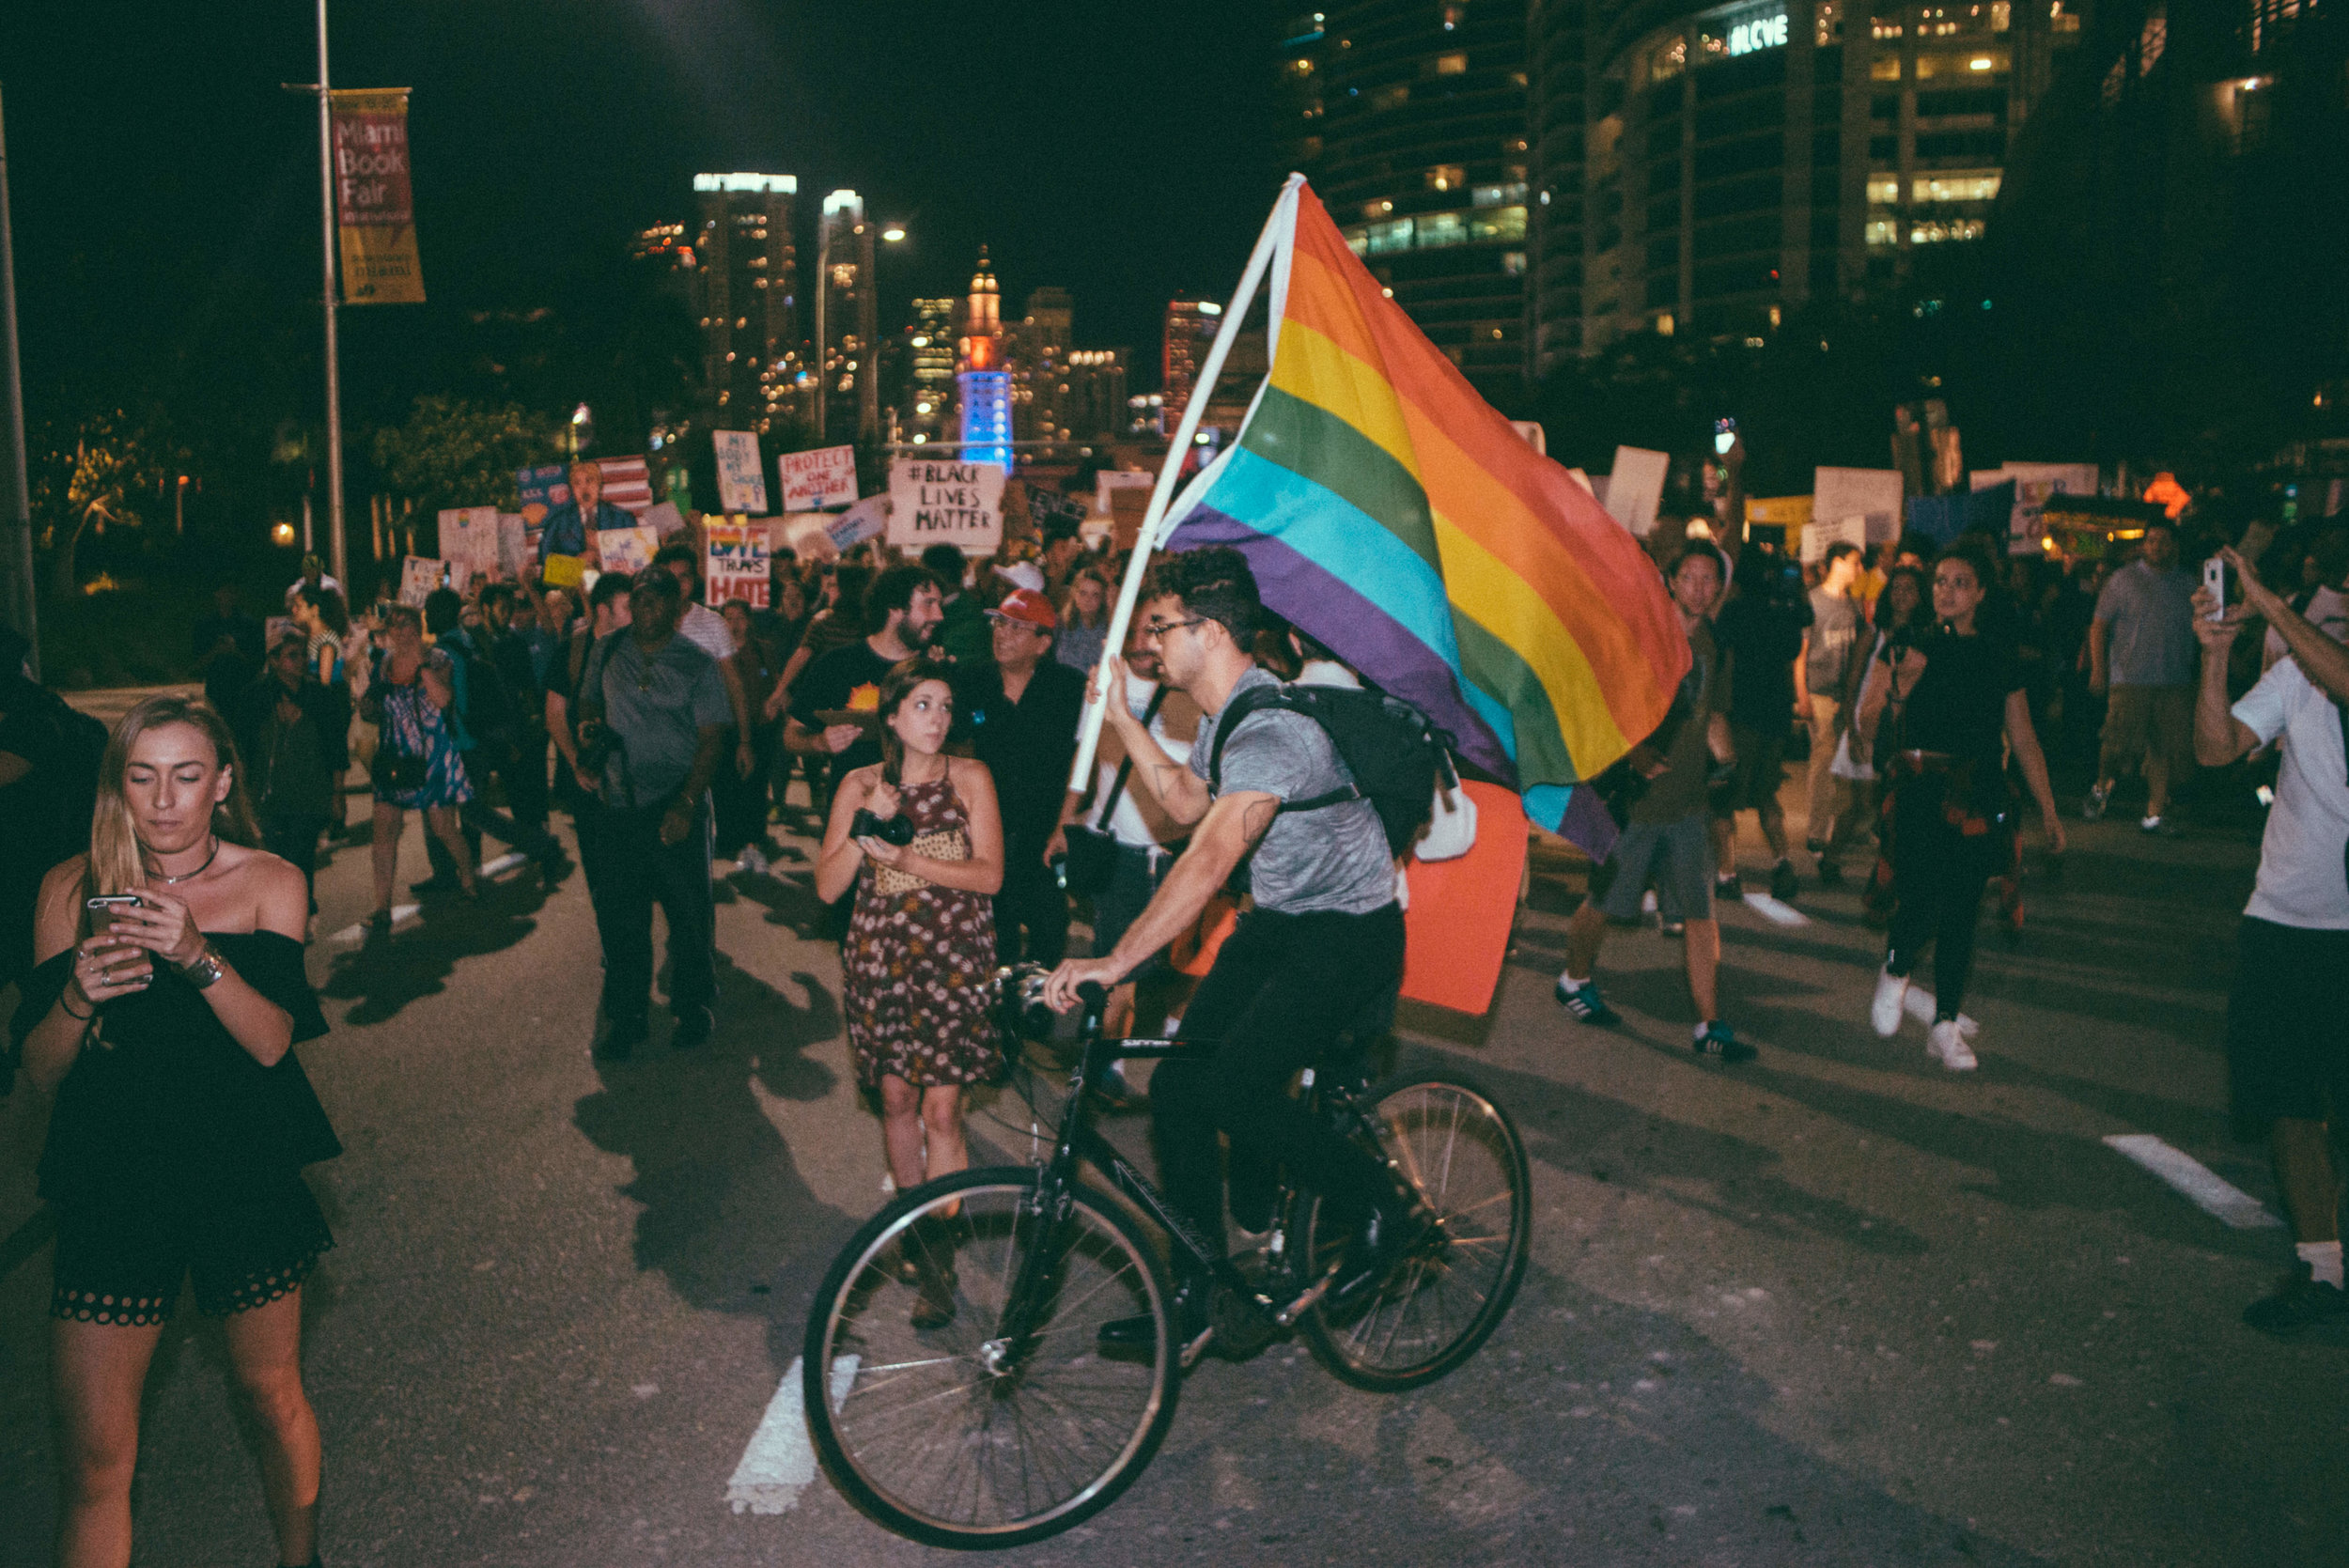  Still one of the most incredible moments in my life going out to Miami and photographing history. This guy was riding his bike with a pride flag, it was at this very moment when I realzied I had lost my phone. 